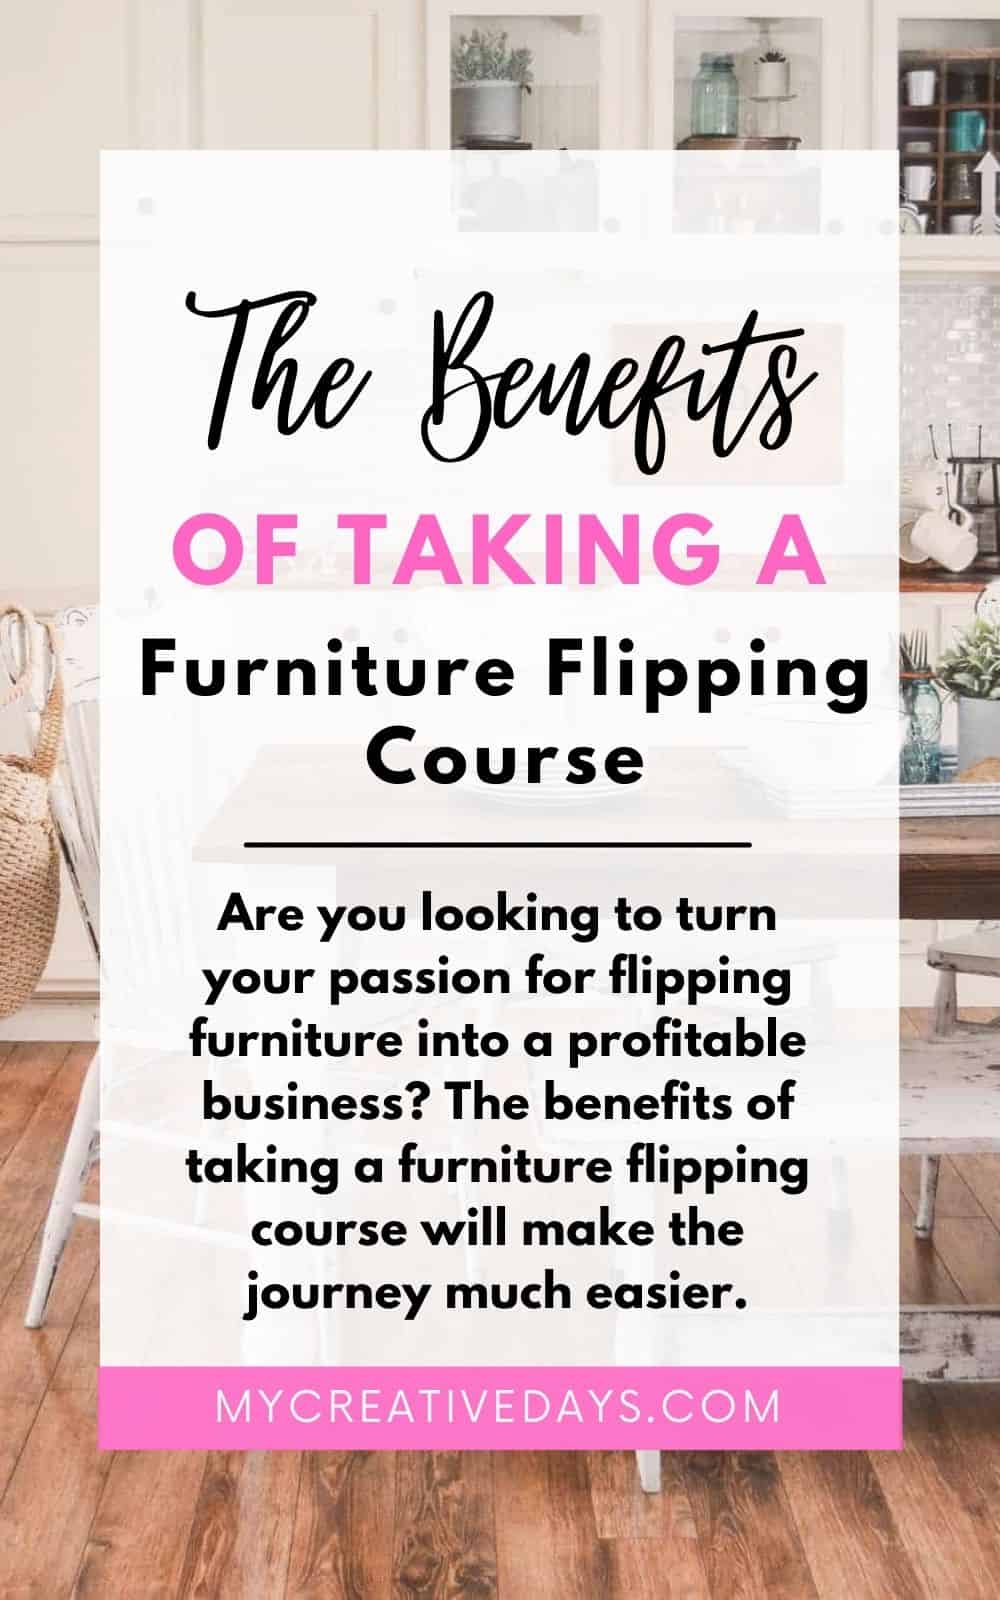 Looking to turn your passion for flipping into profit? The benefits of taking a furniture flipping course will make the journey much easier.